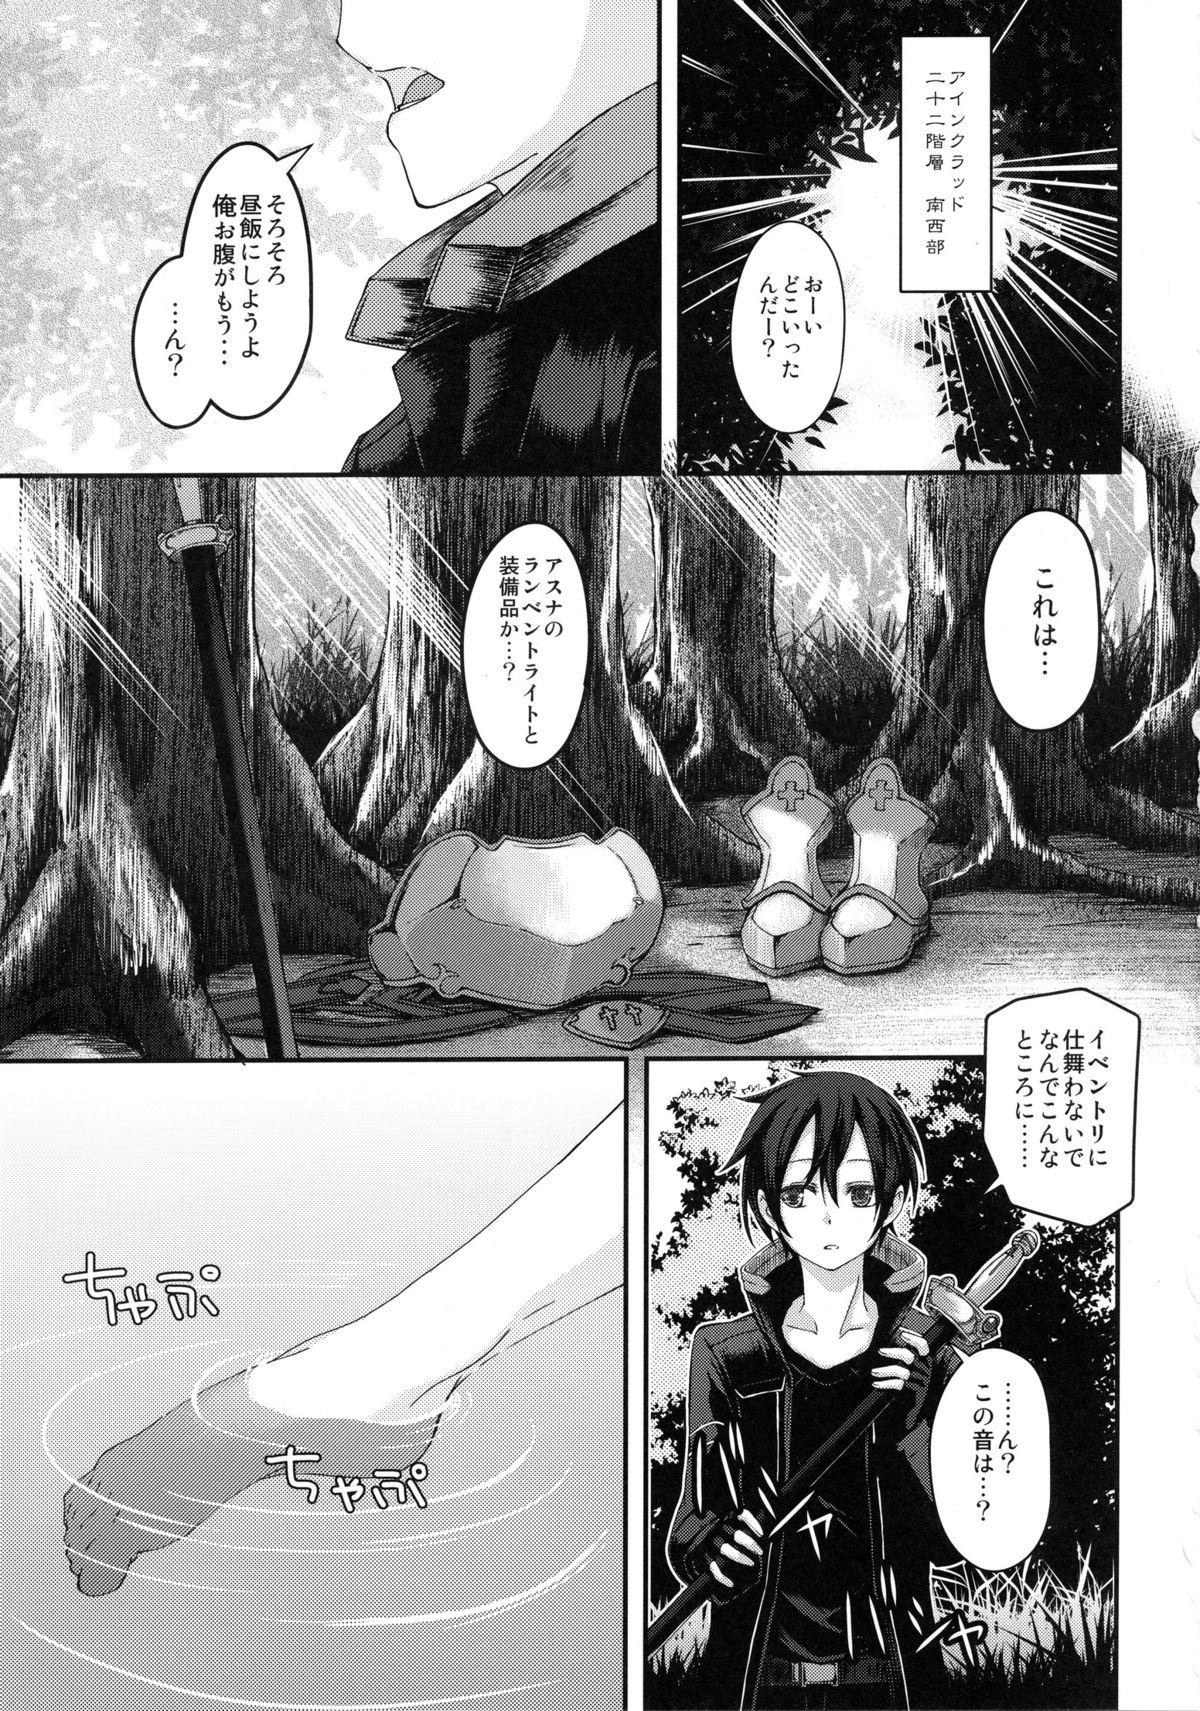 Passion Marriage Experience - Sword art online Group - Page 2